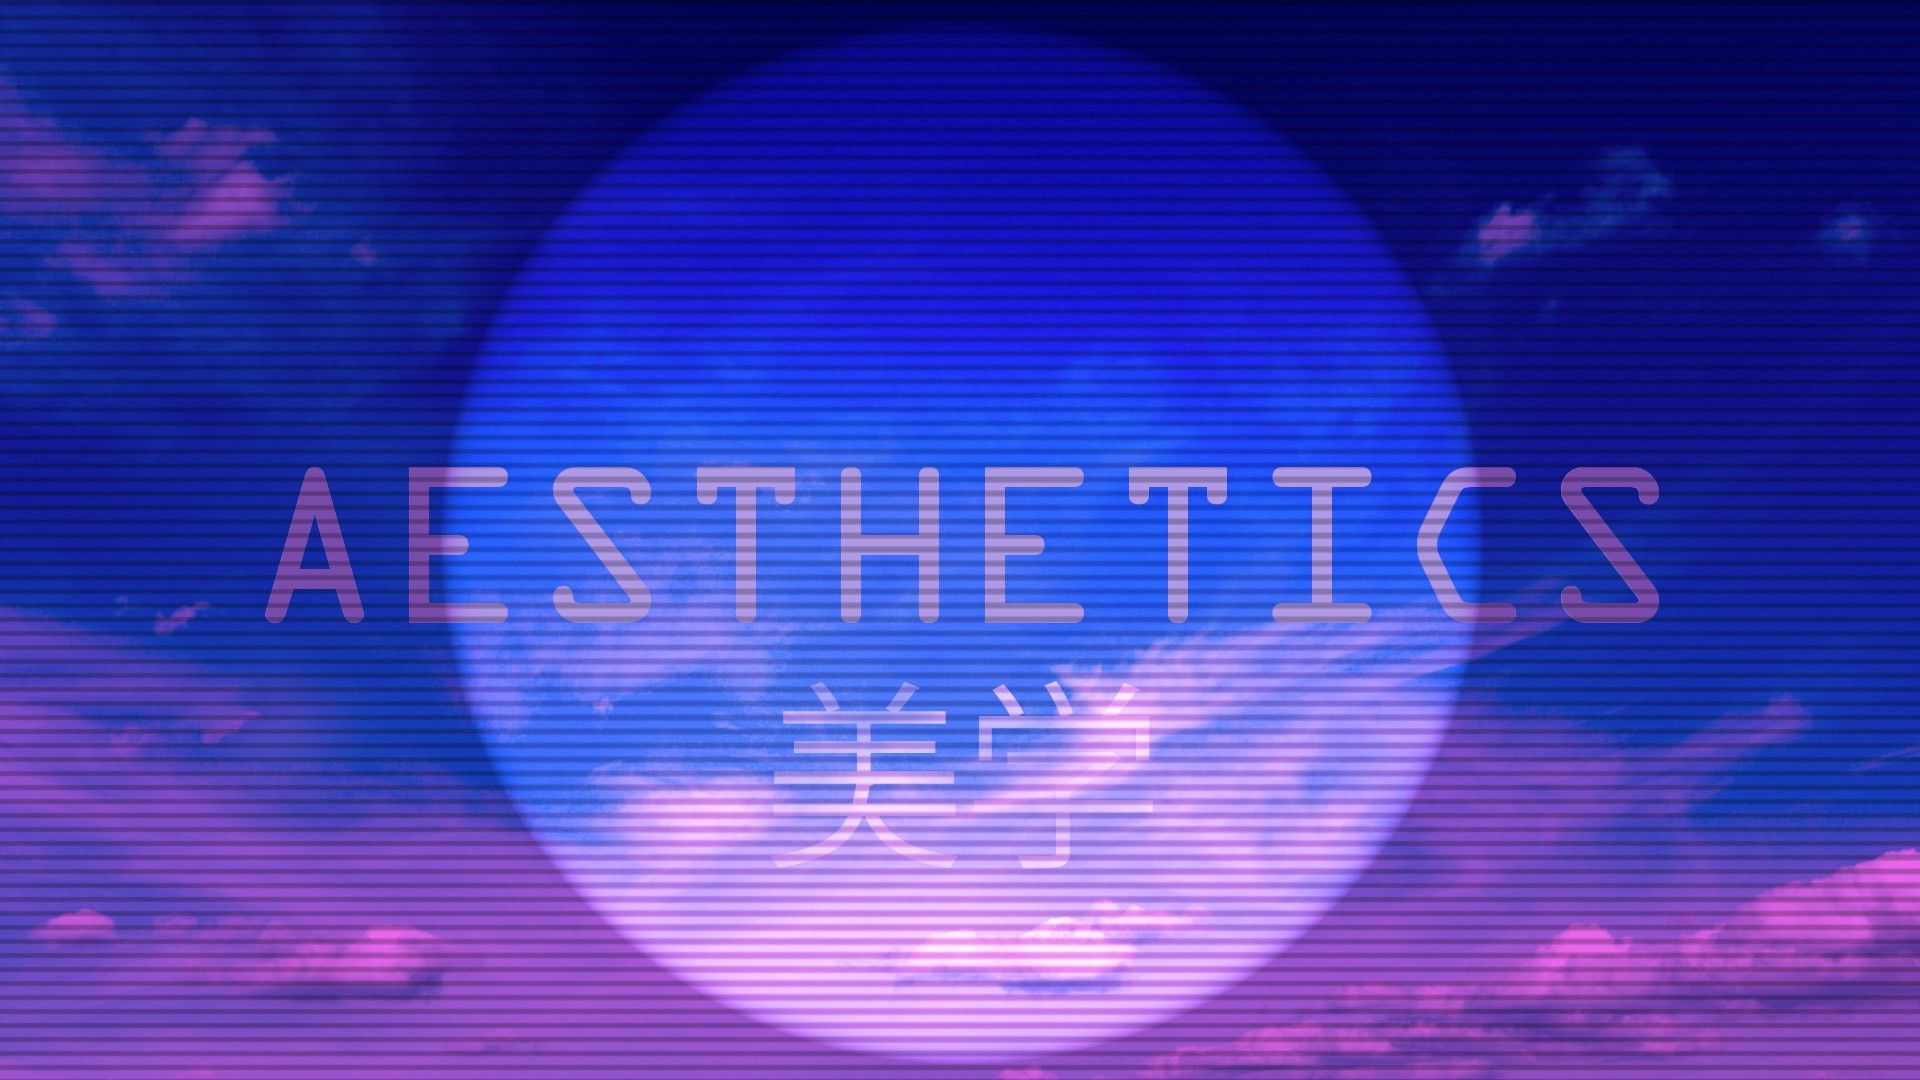 A blue sky with clouds and the word ashetics - Vaporwave